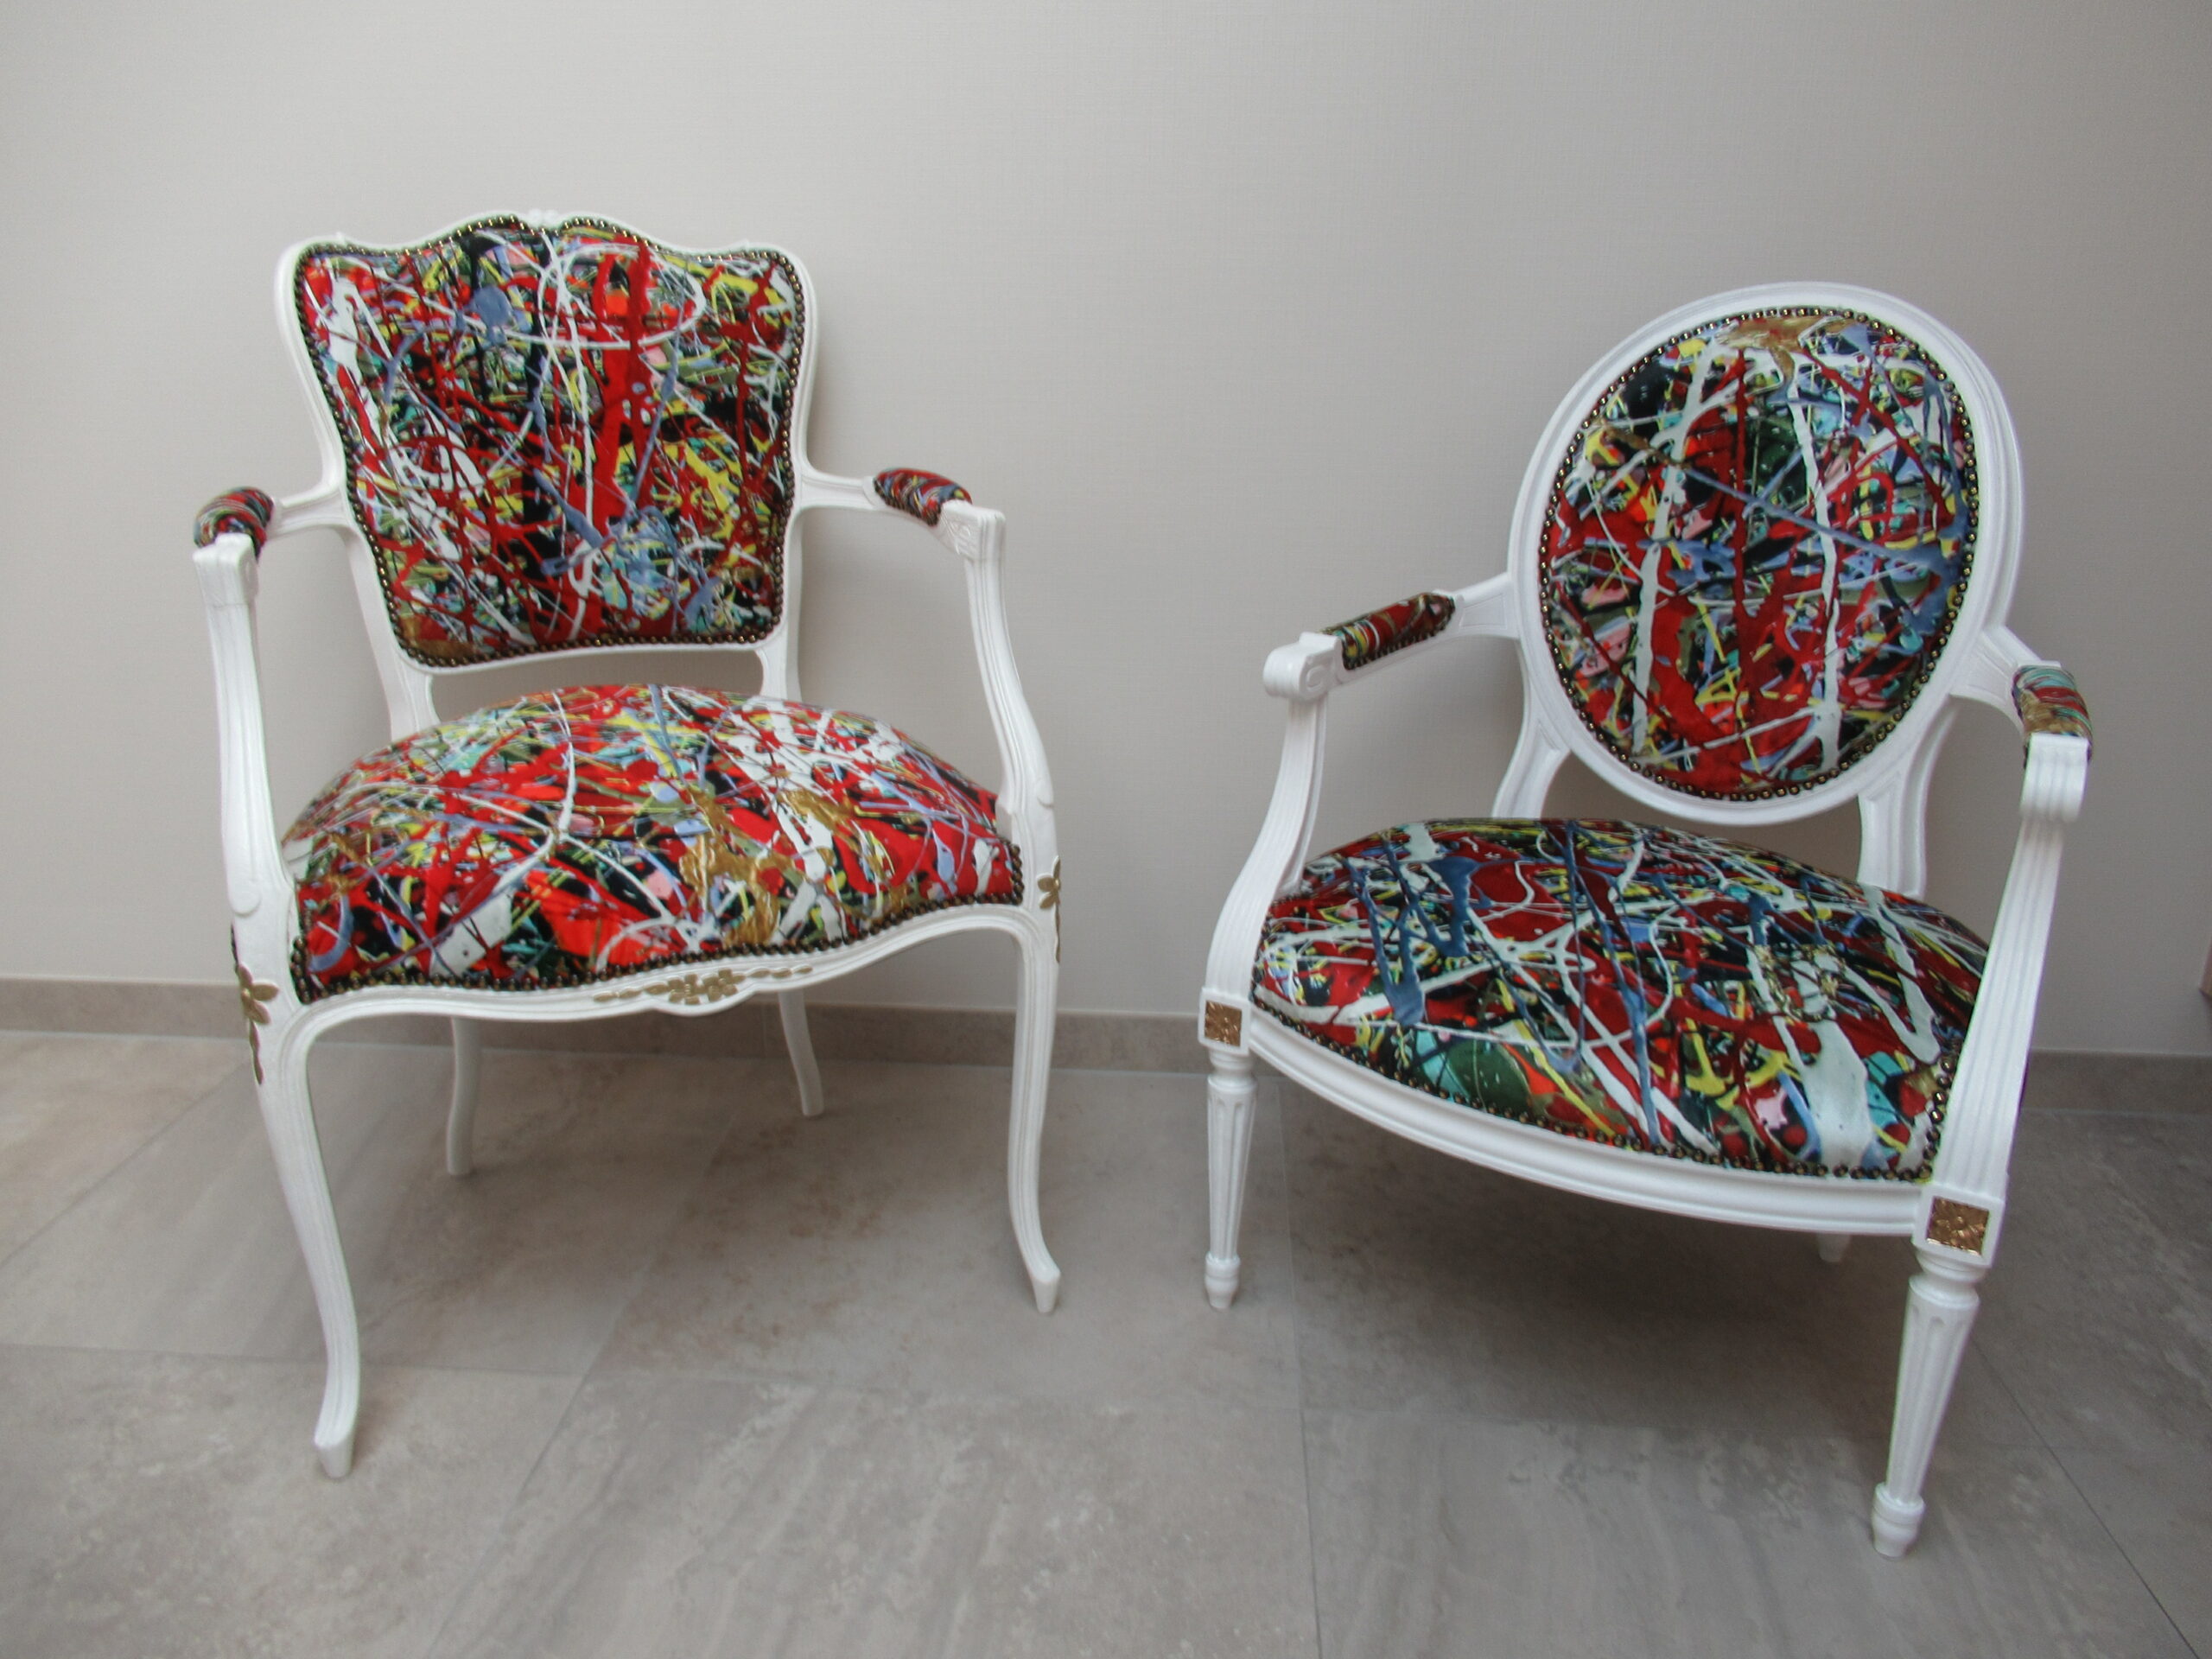 Art Chair nr 2 and nr 7